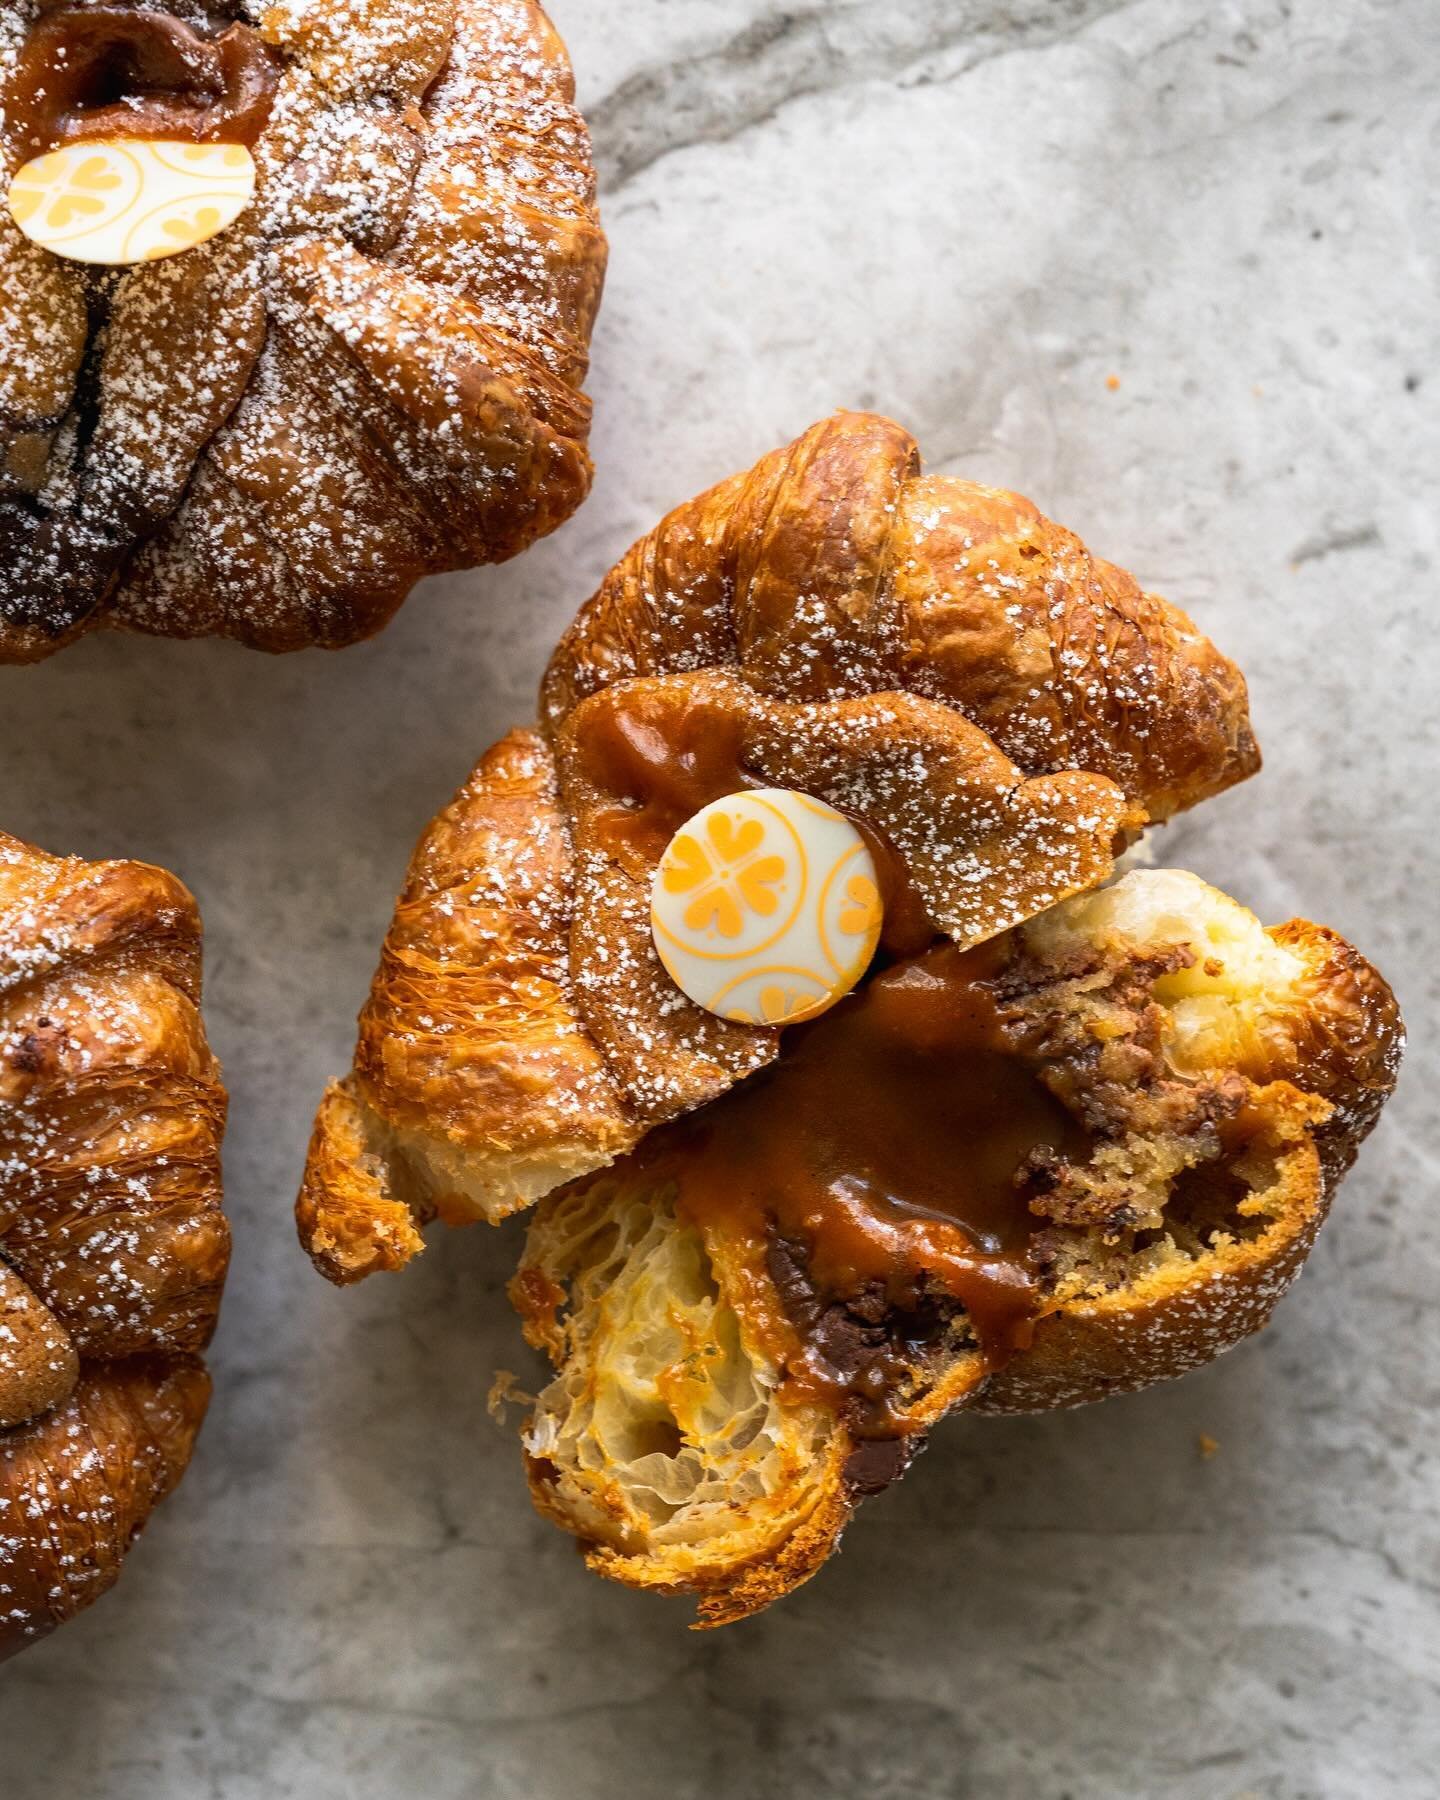 Banoffee Cookie Croissant ~ mini butter croissants, filled with our classic Valrhona chocolate chip cookie dough and a decadent salted banana caramel.

#bakery #dishedvan #yvreats #vancouverfoodie #cookiecroissant